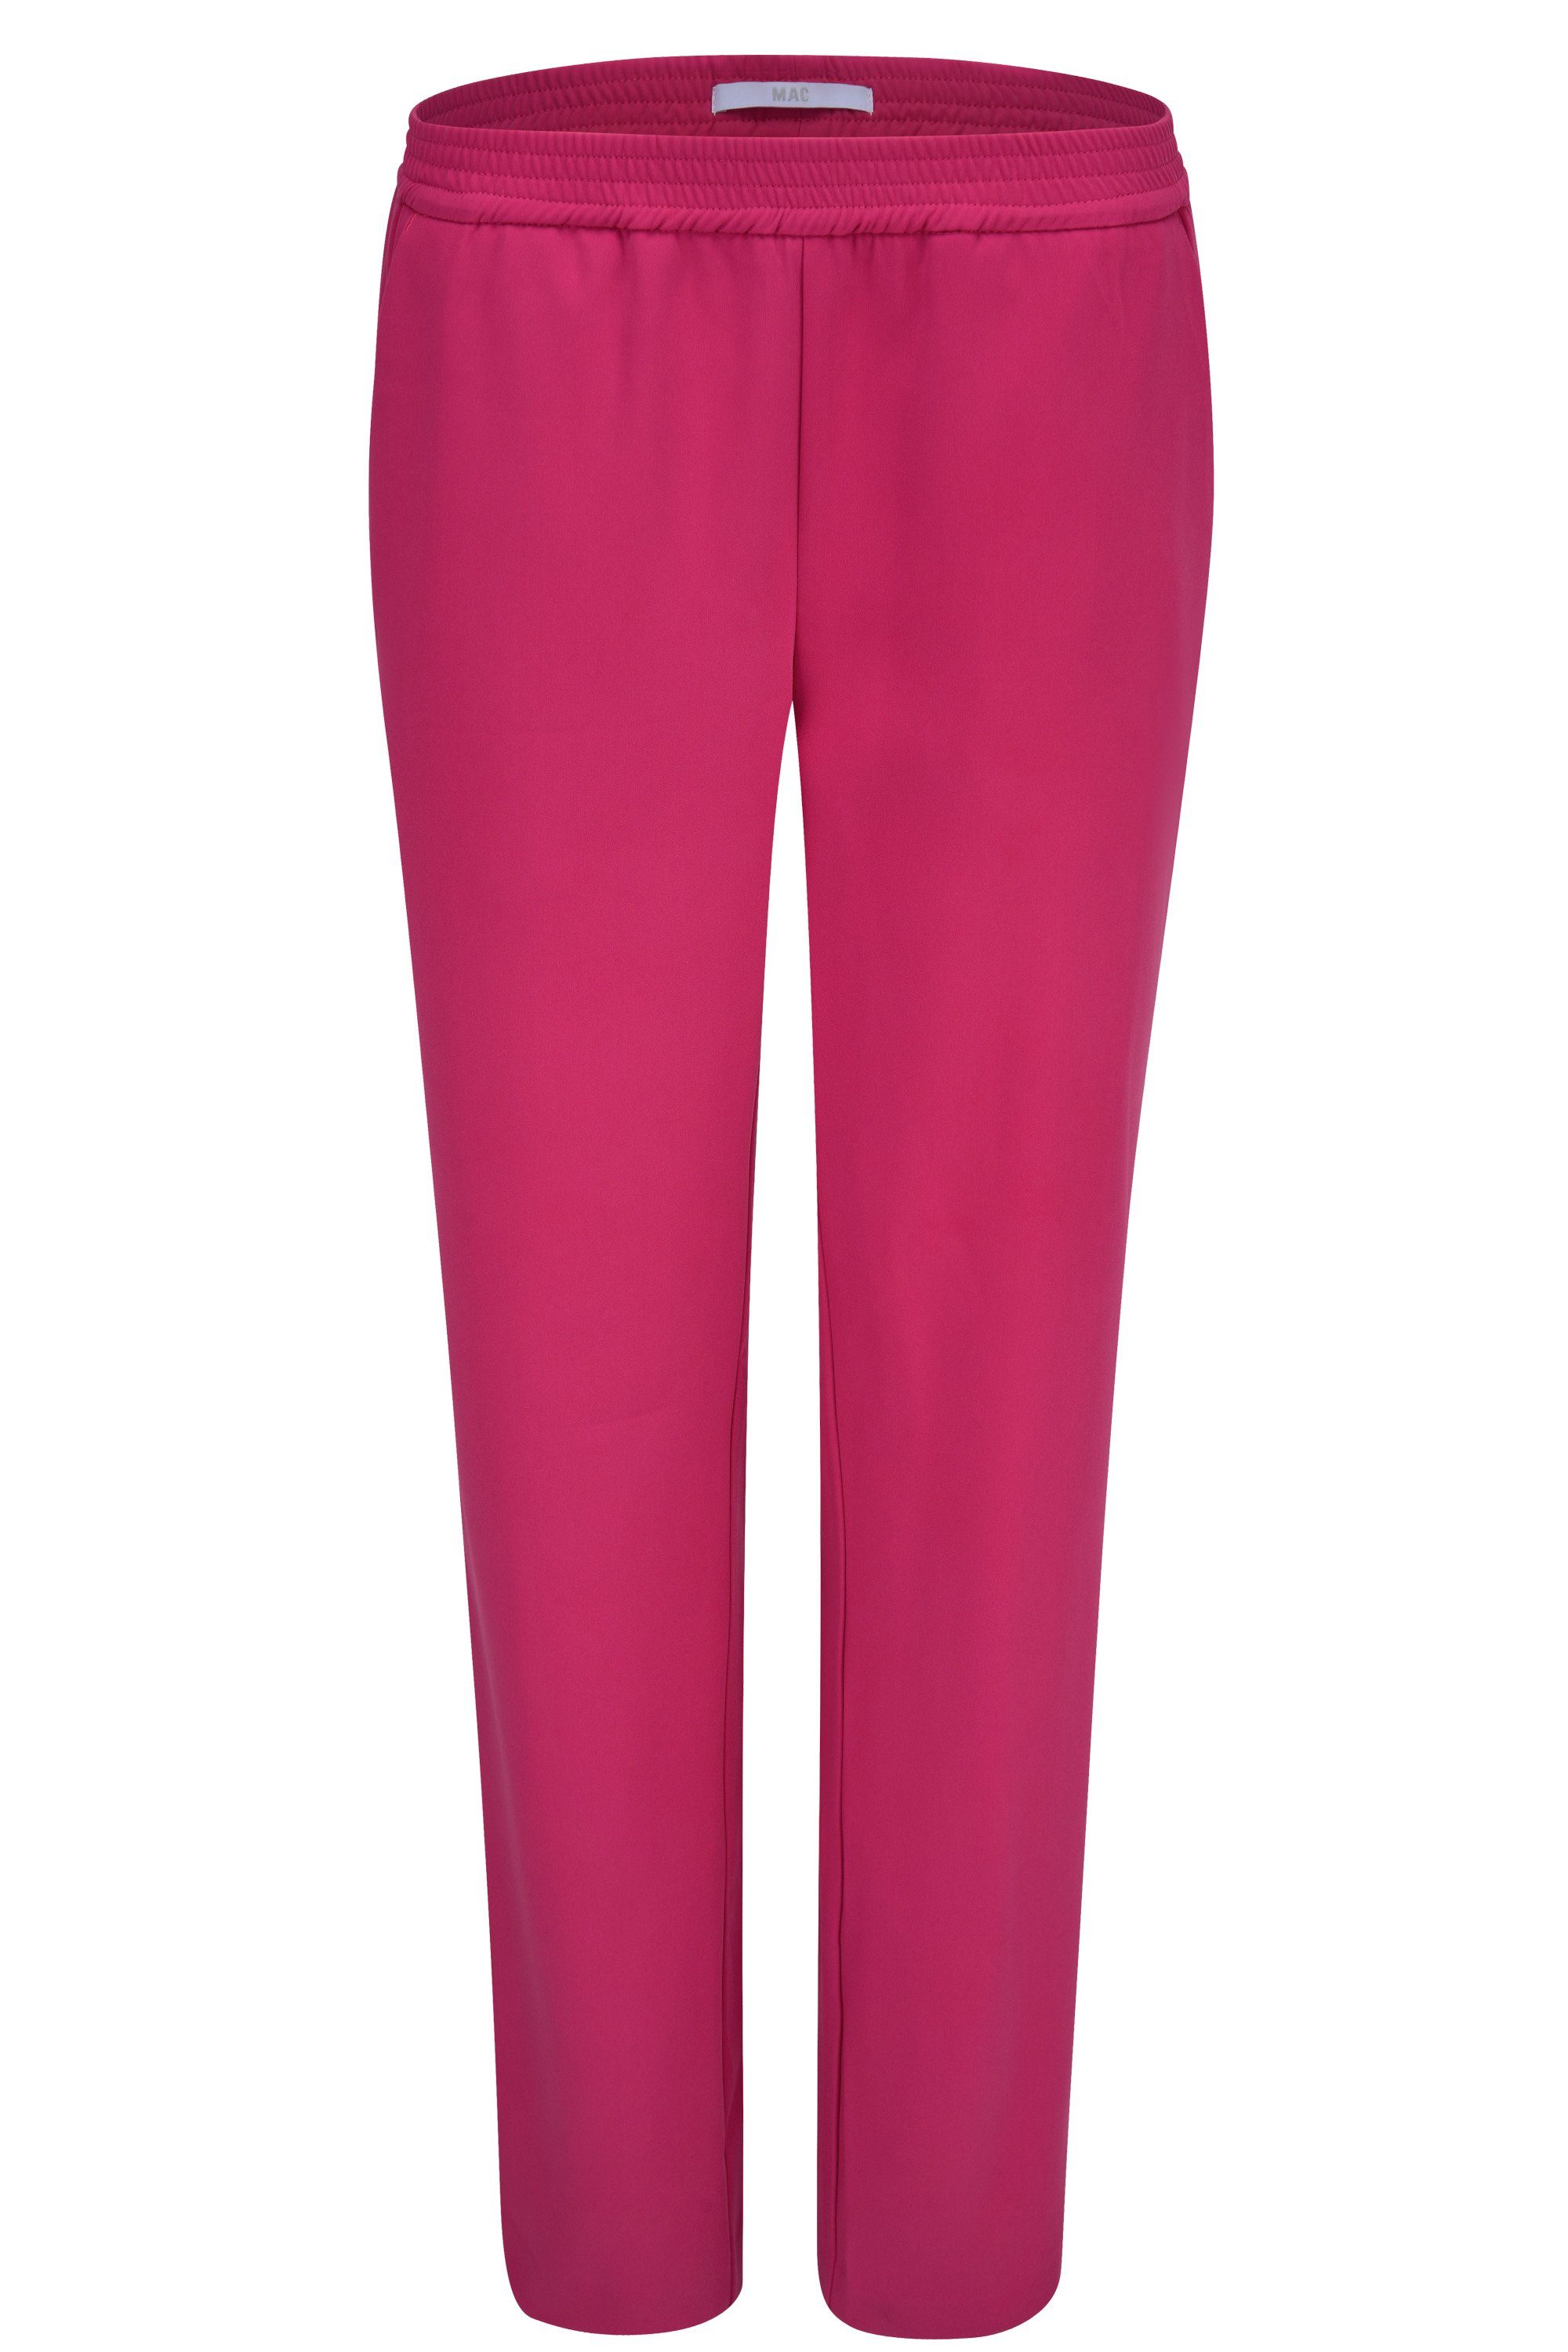 MAC Stretch-Jeans MAC EASY candy pink 2213-00-0231 438 | Stretchjeans